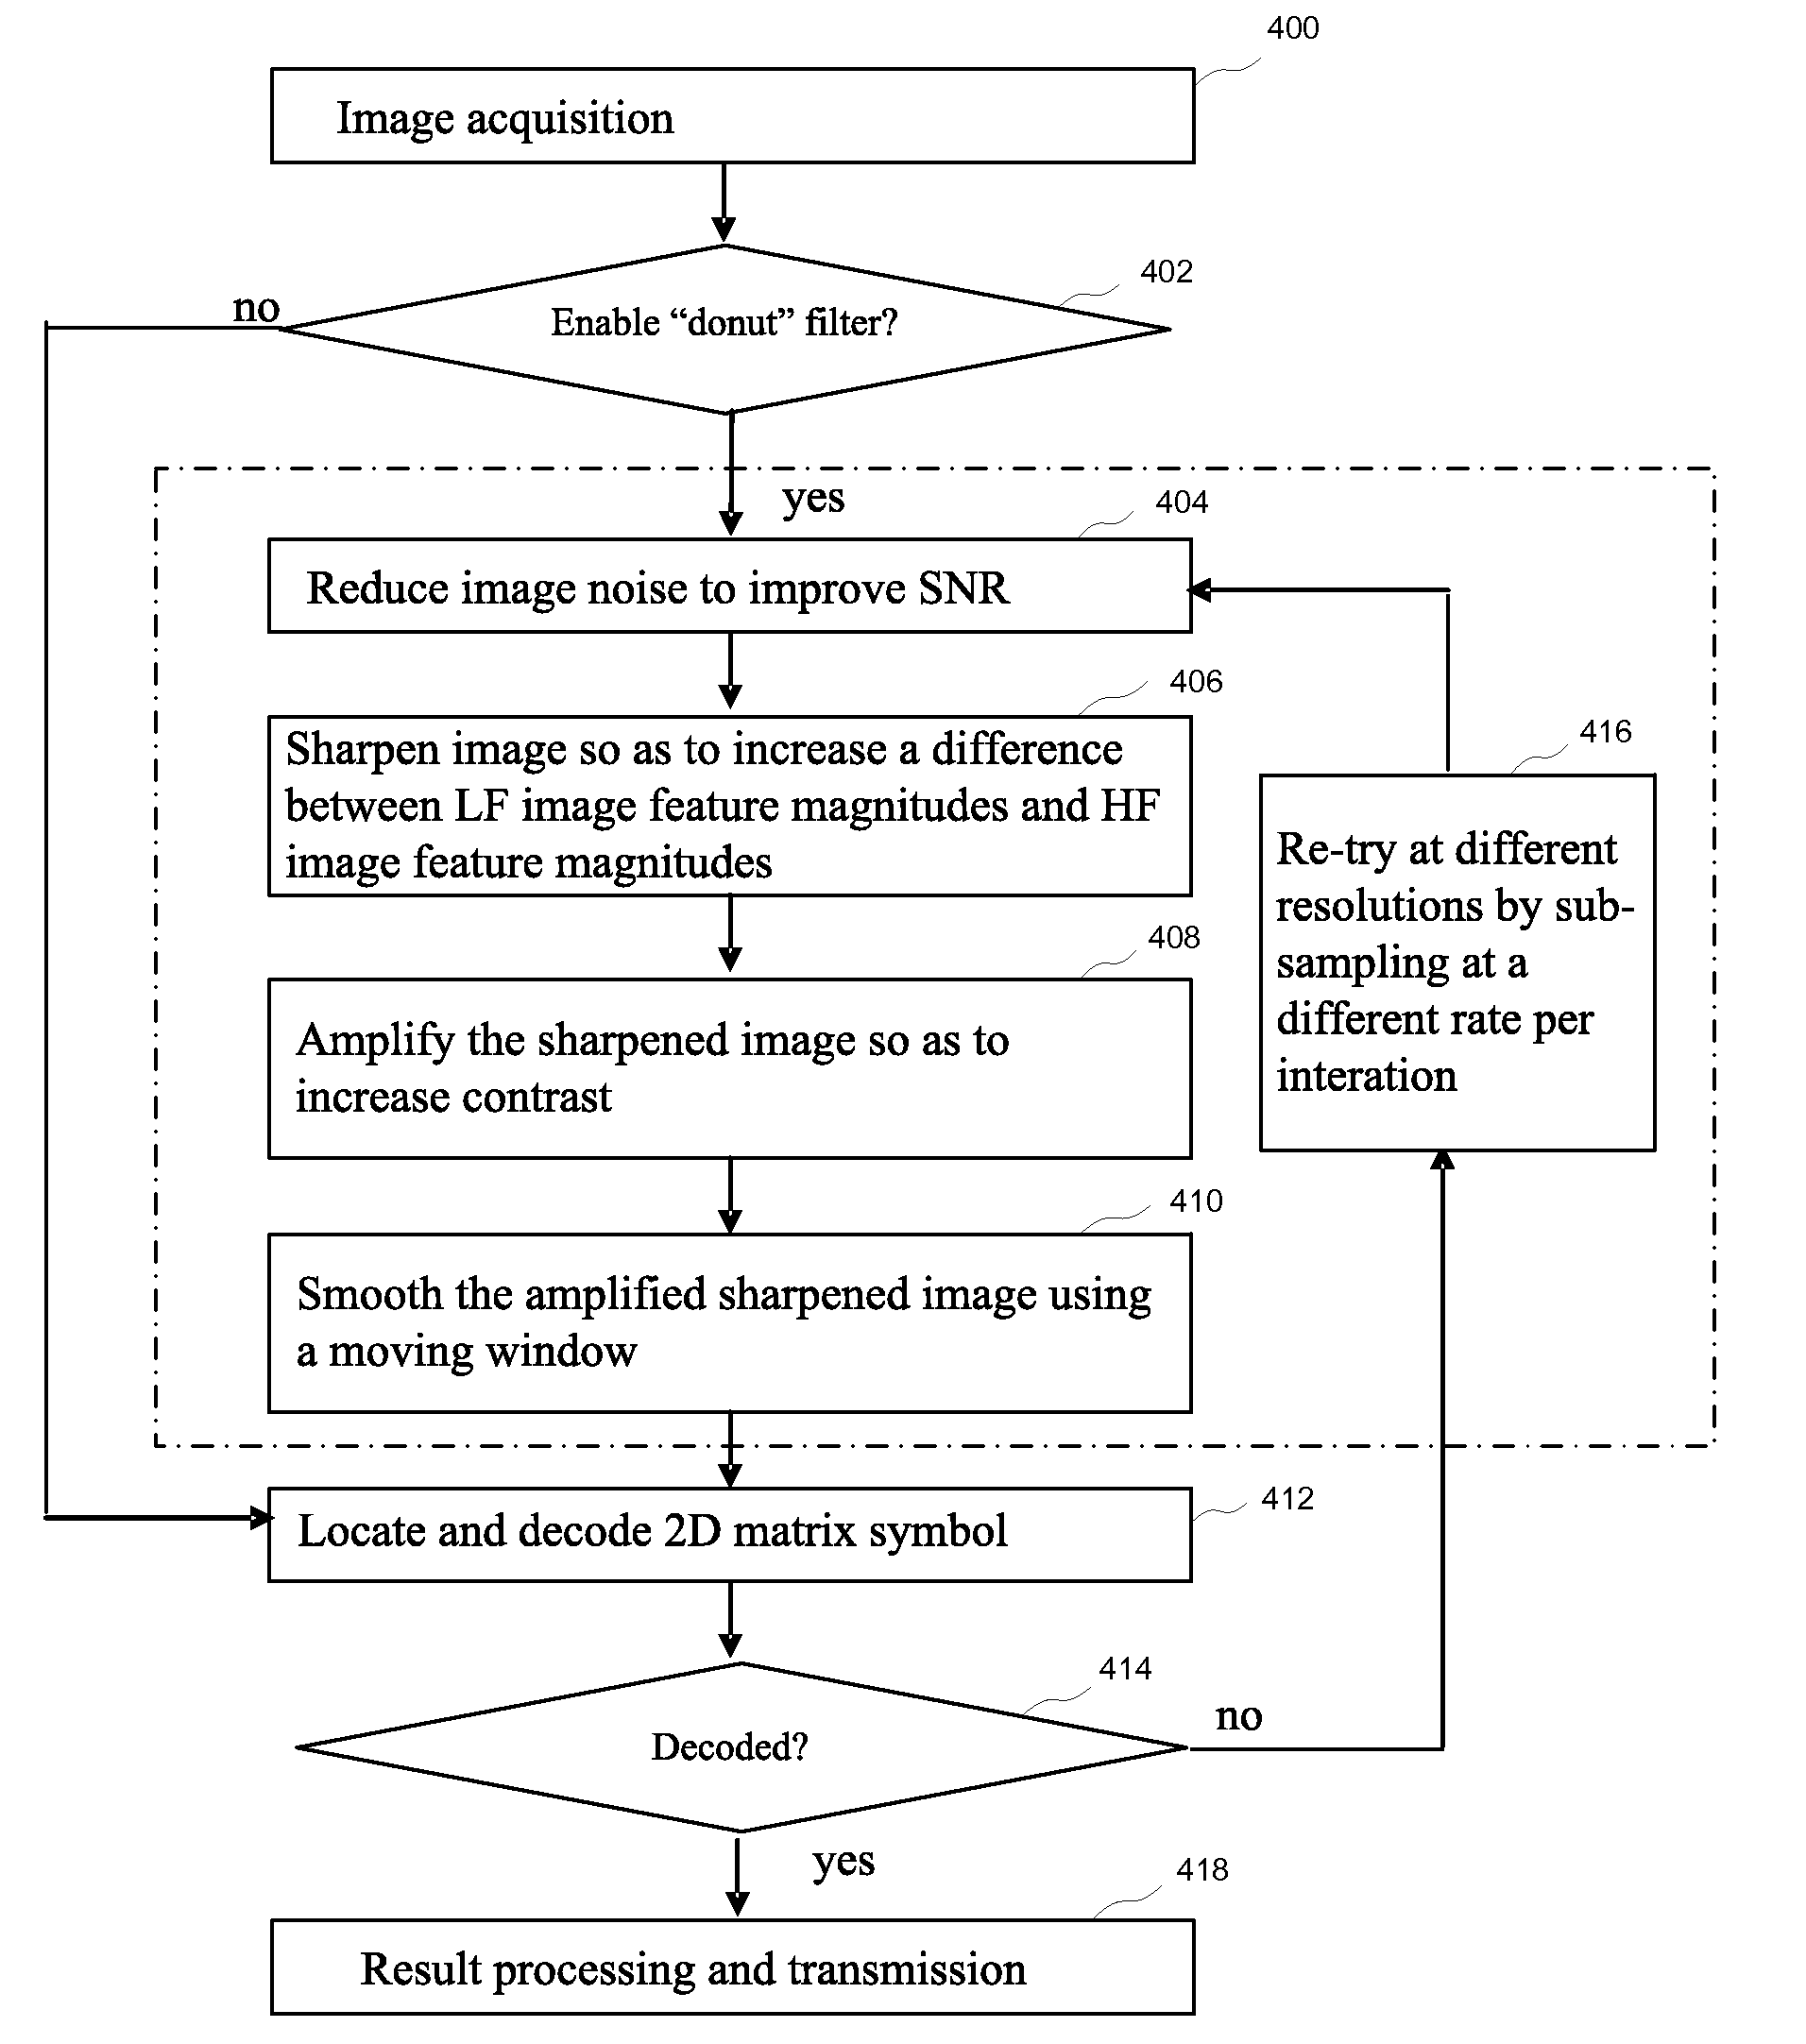 Methods for locating and decoding distorted two-dimensional matrix symbols